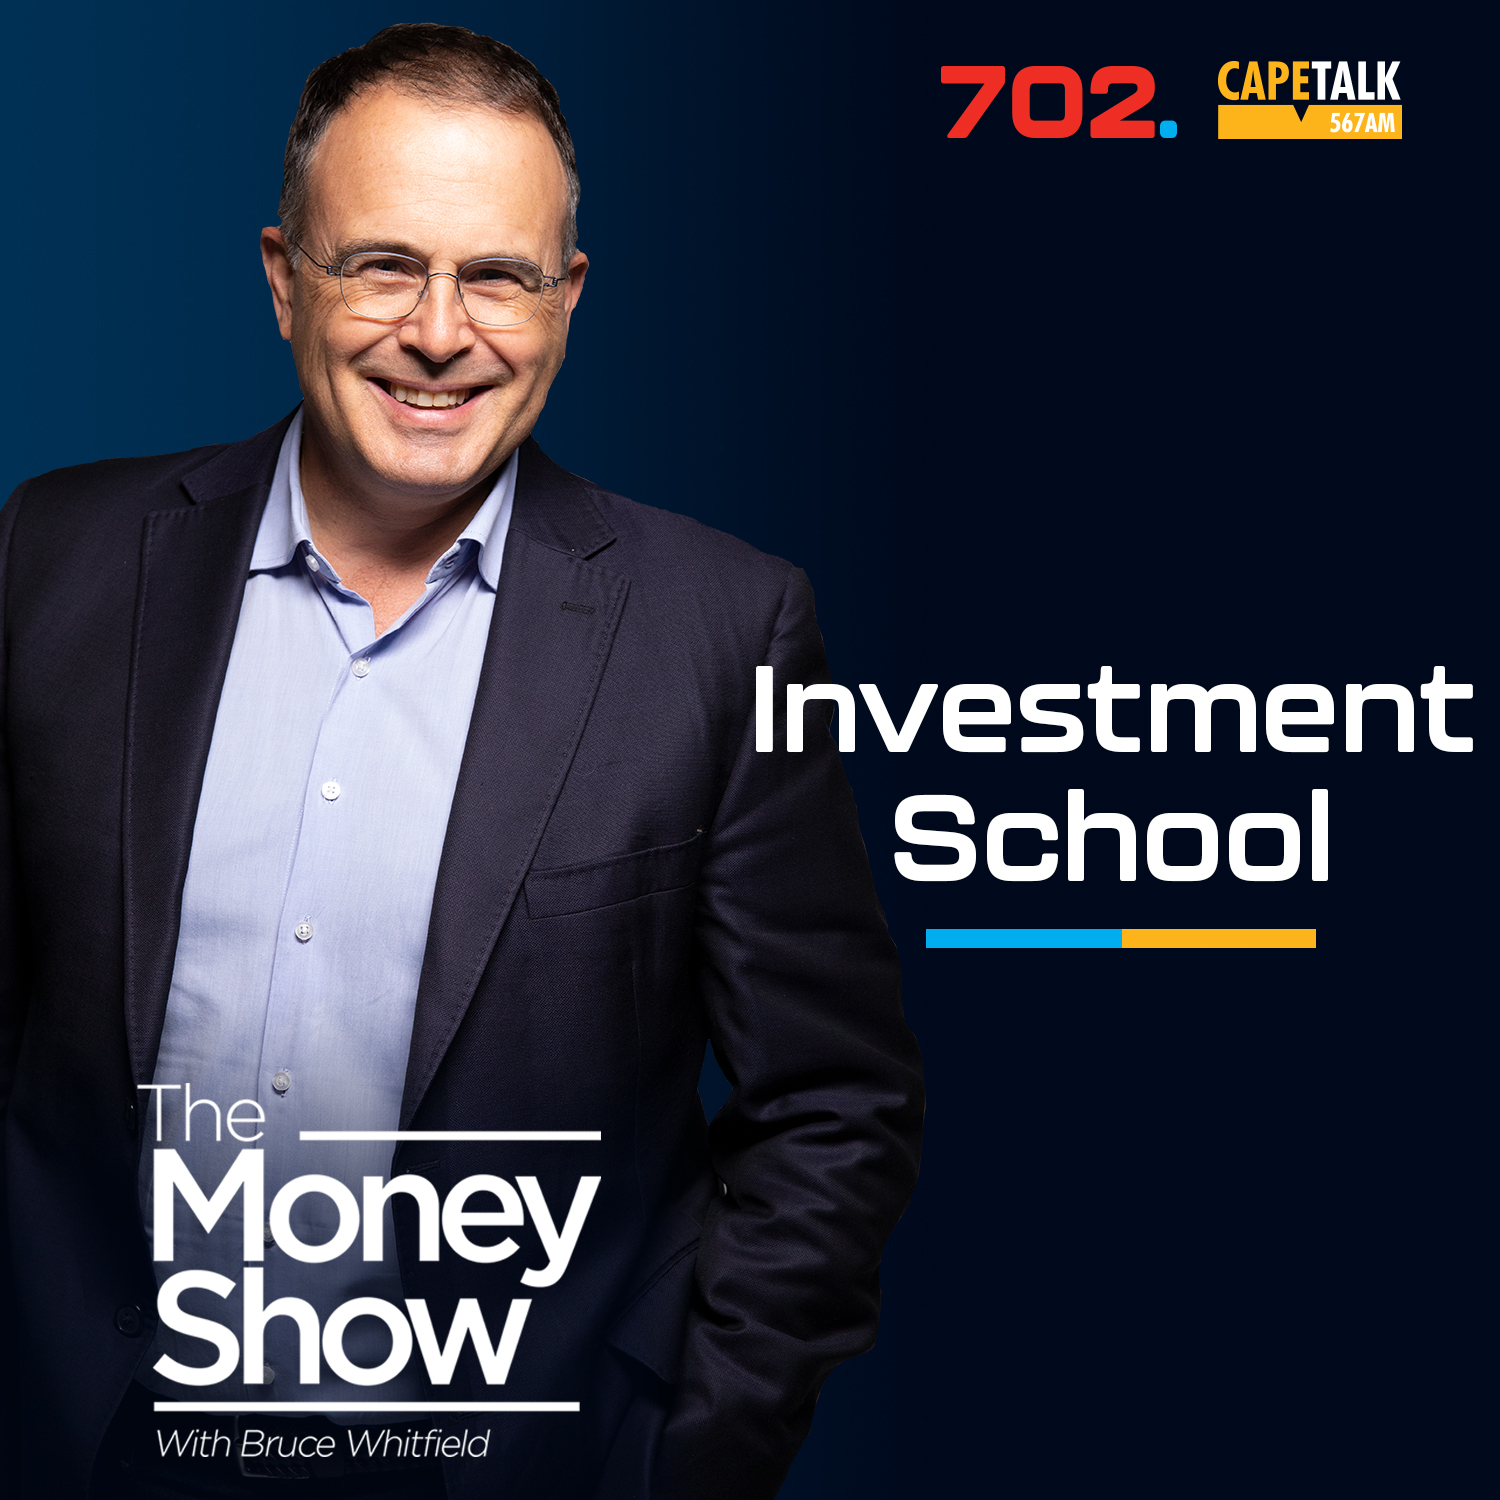 Investment School - “keep your powder dry” …why you should have cash in hand waiting in the side lines.